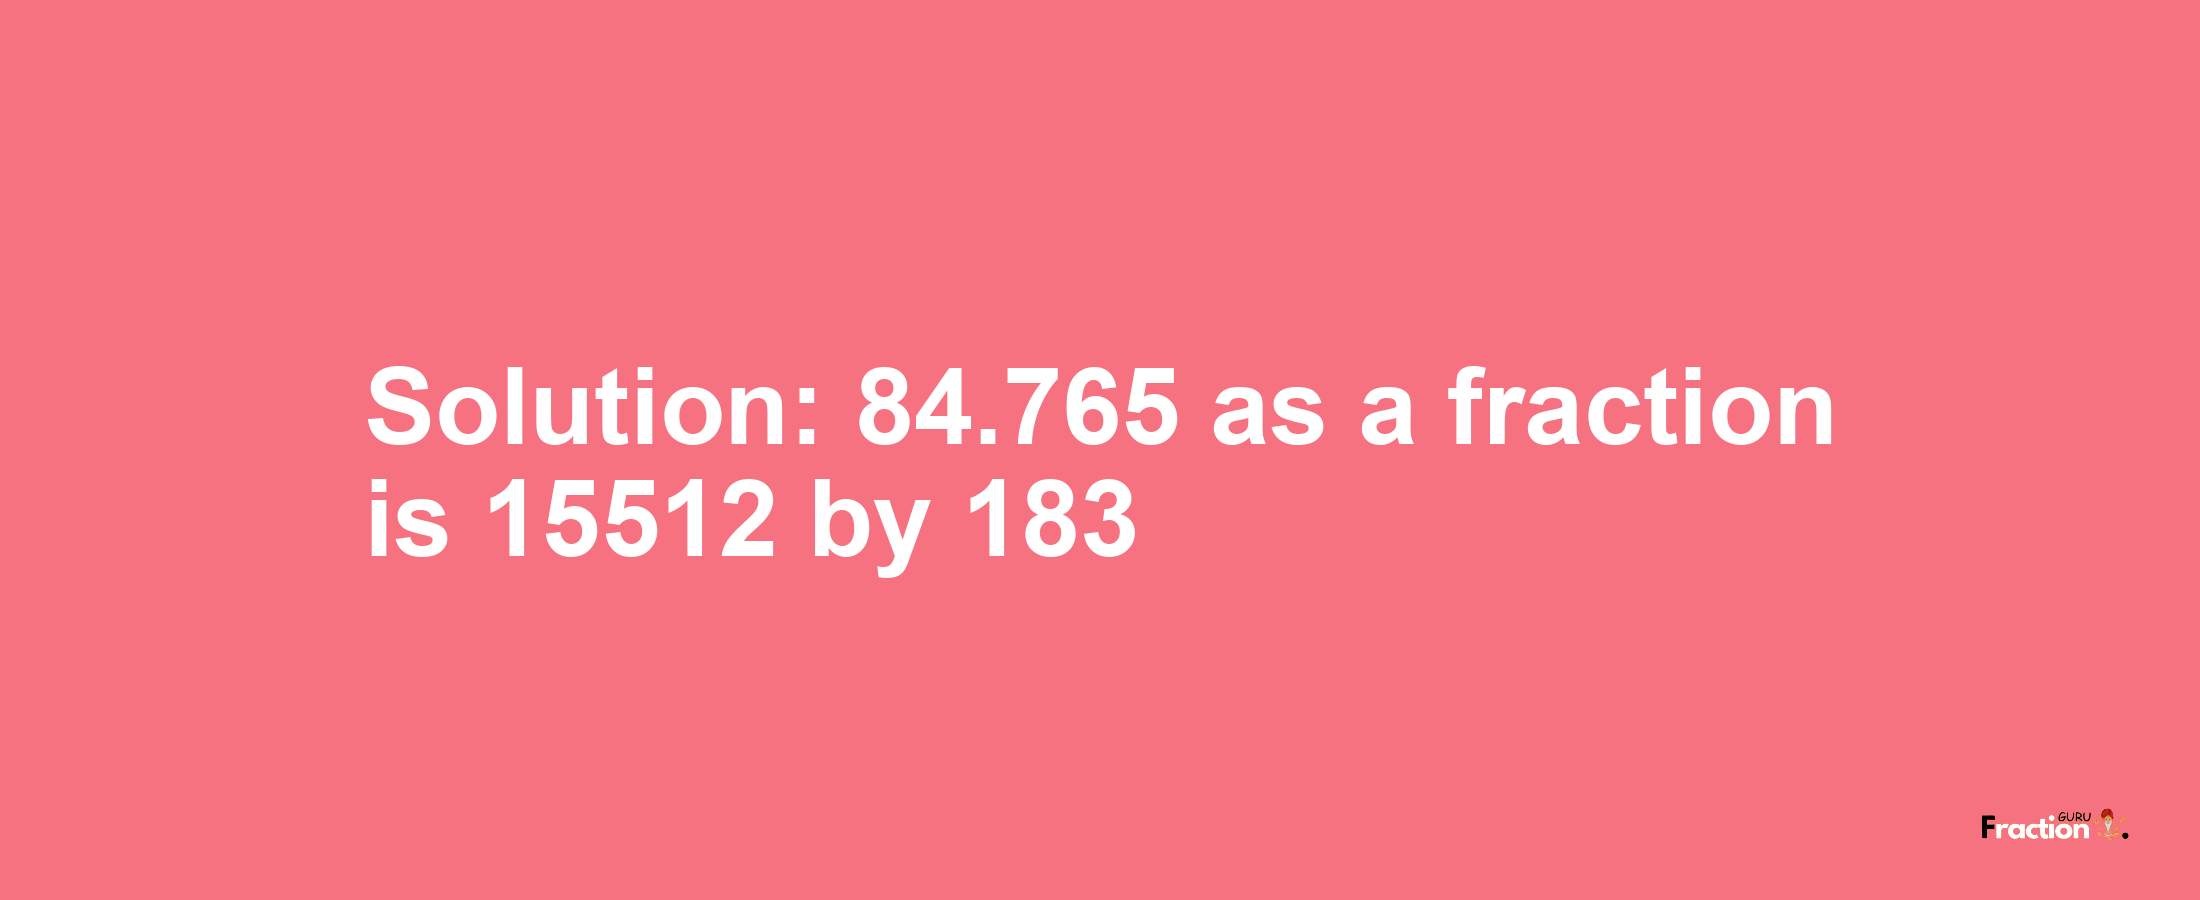 Solution:84.765 as a fraction is 15512/183